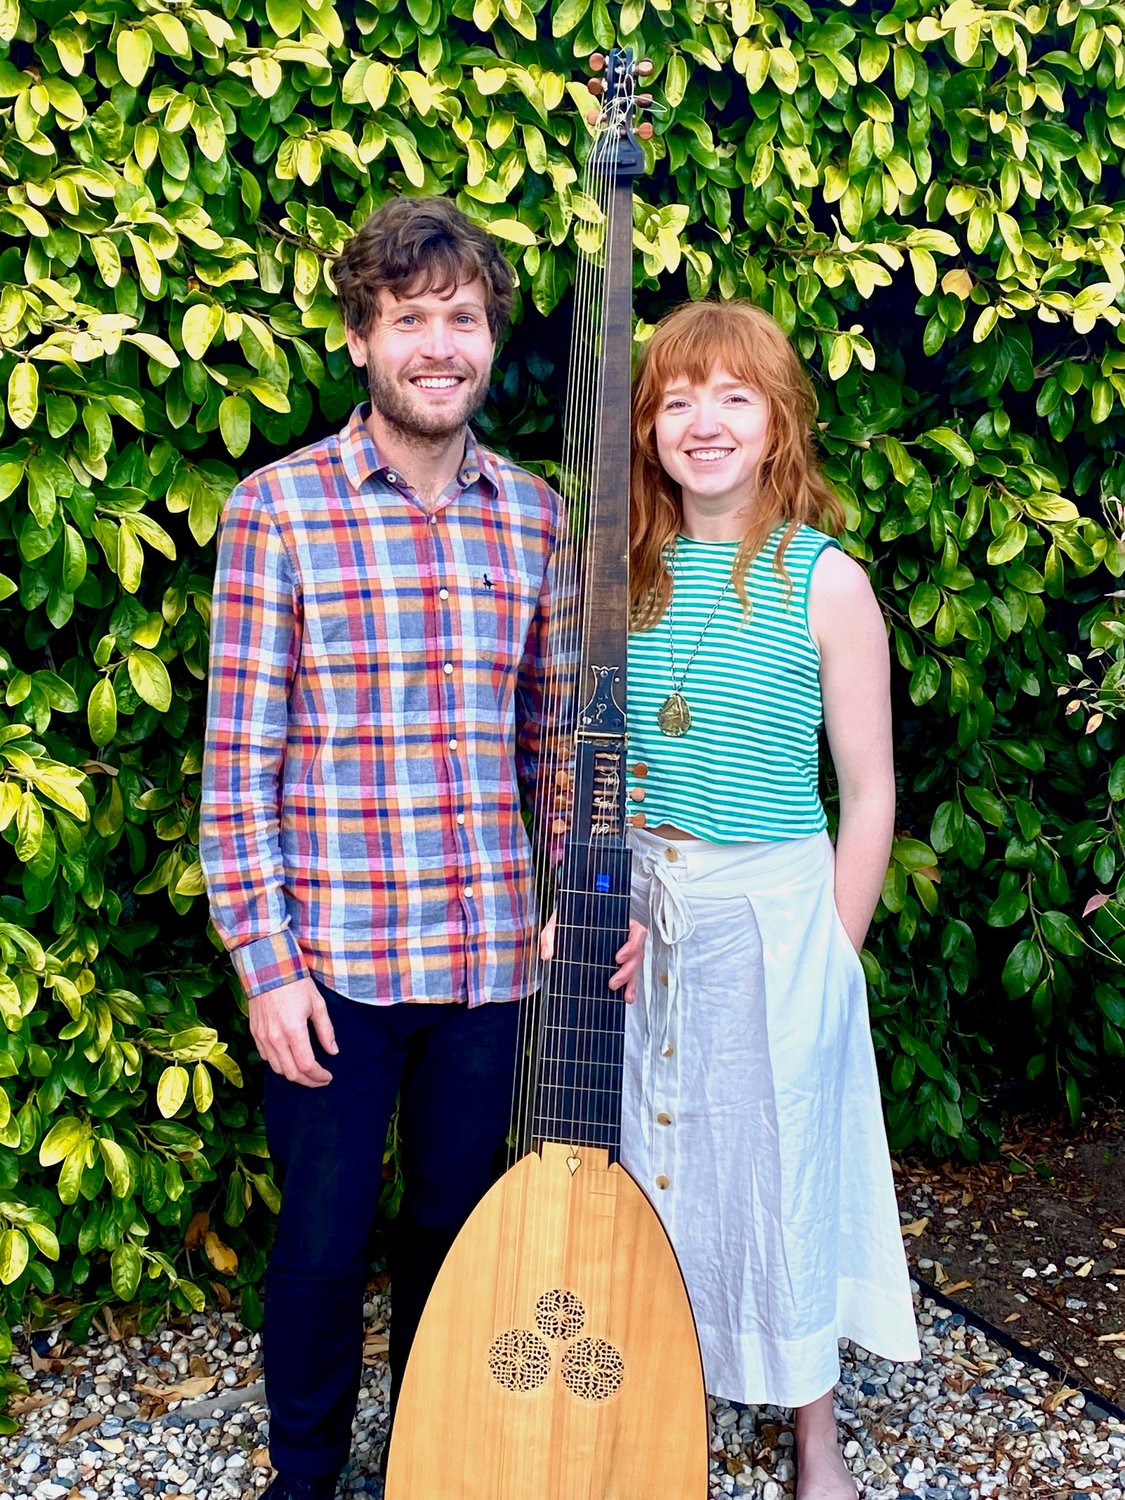 The Gillespie-Morton Duo will perform a free outdoor concert, “Disordering the Attic,” on Saturday, June 19.